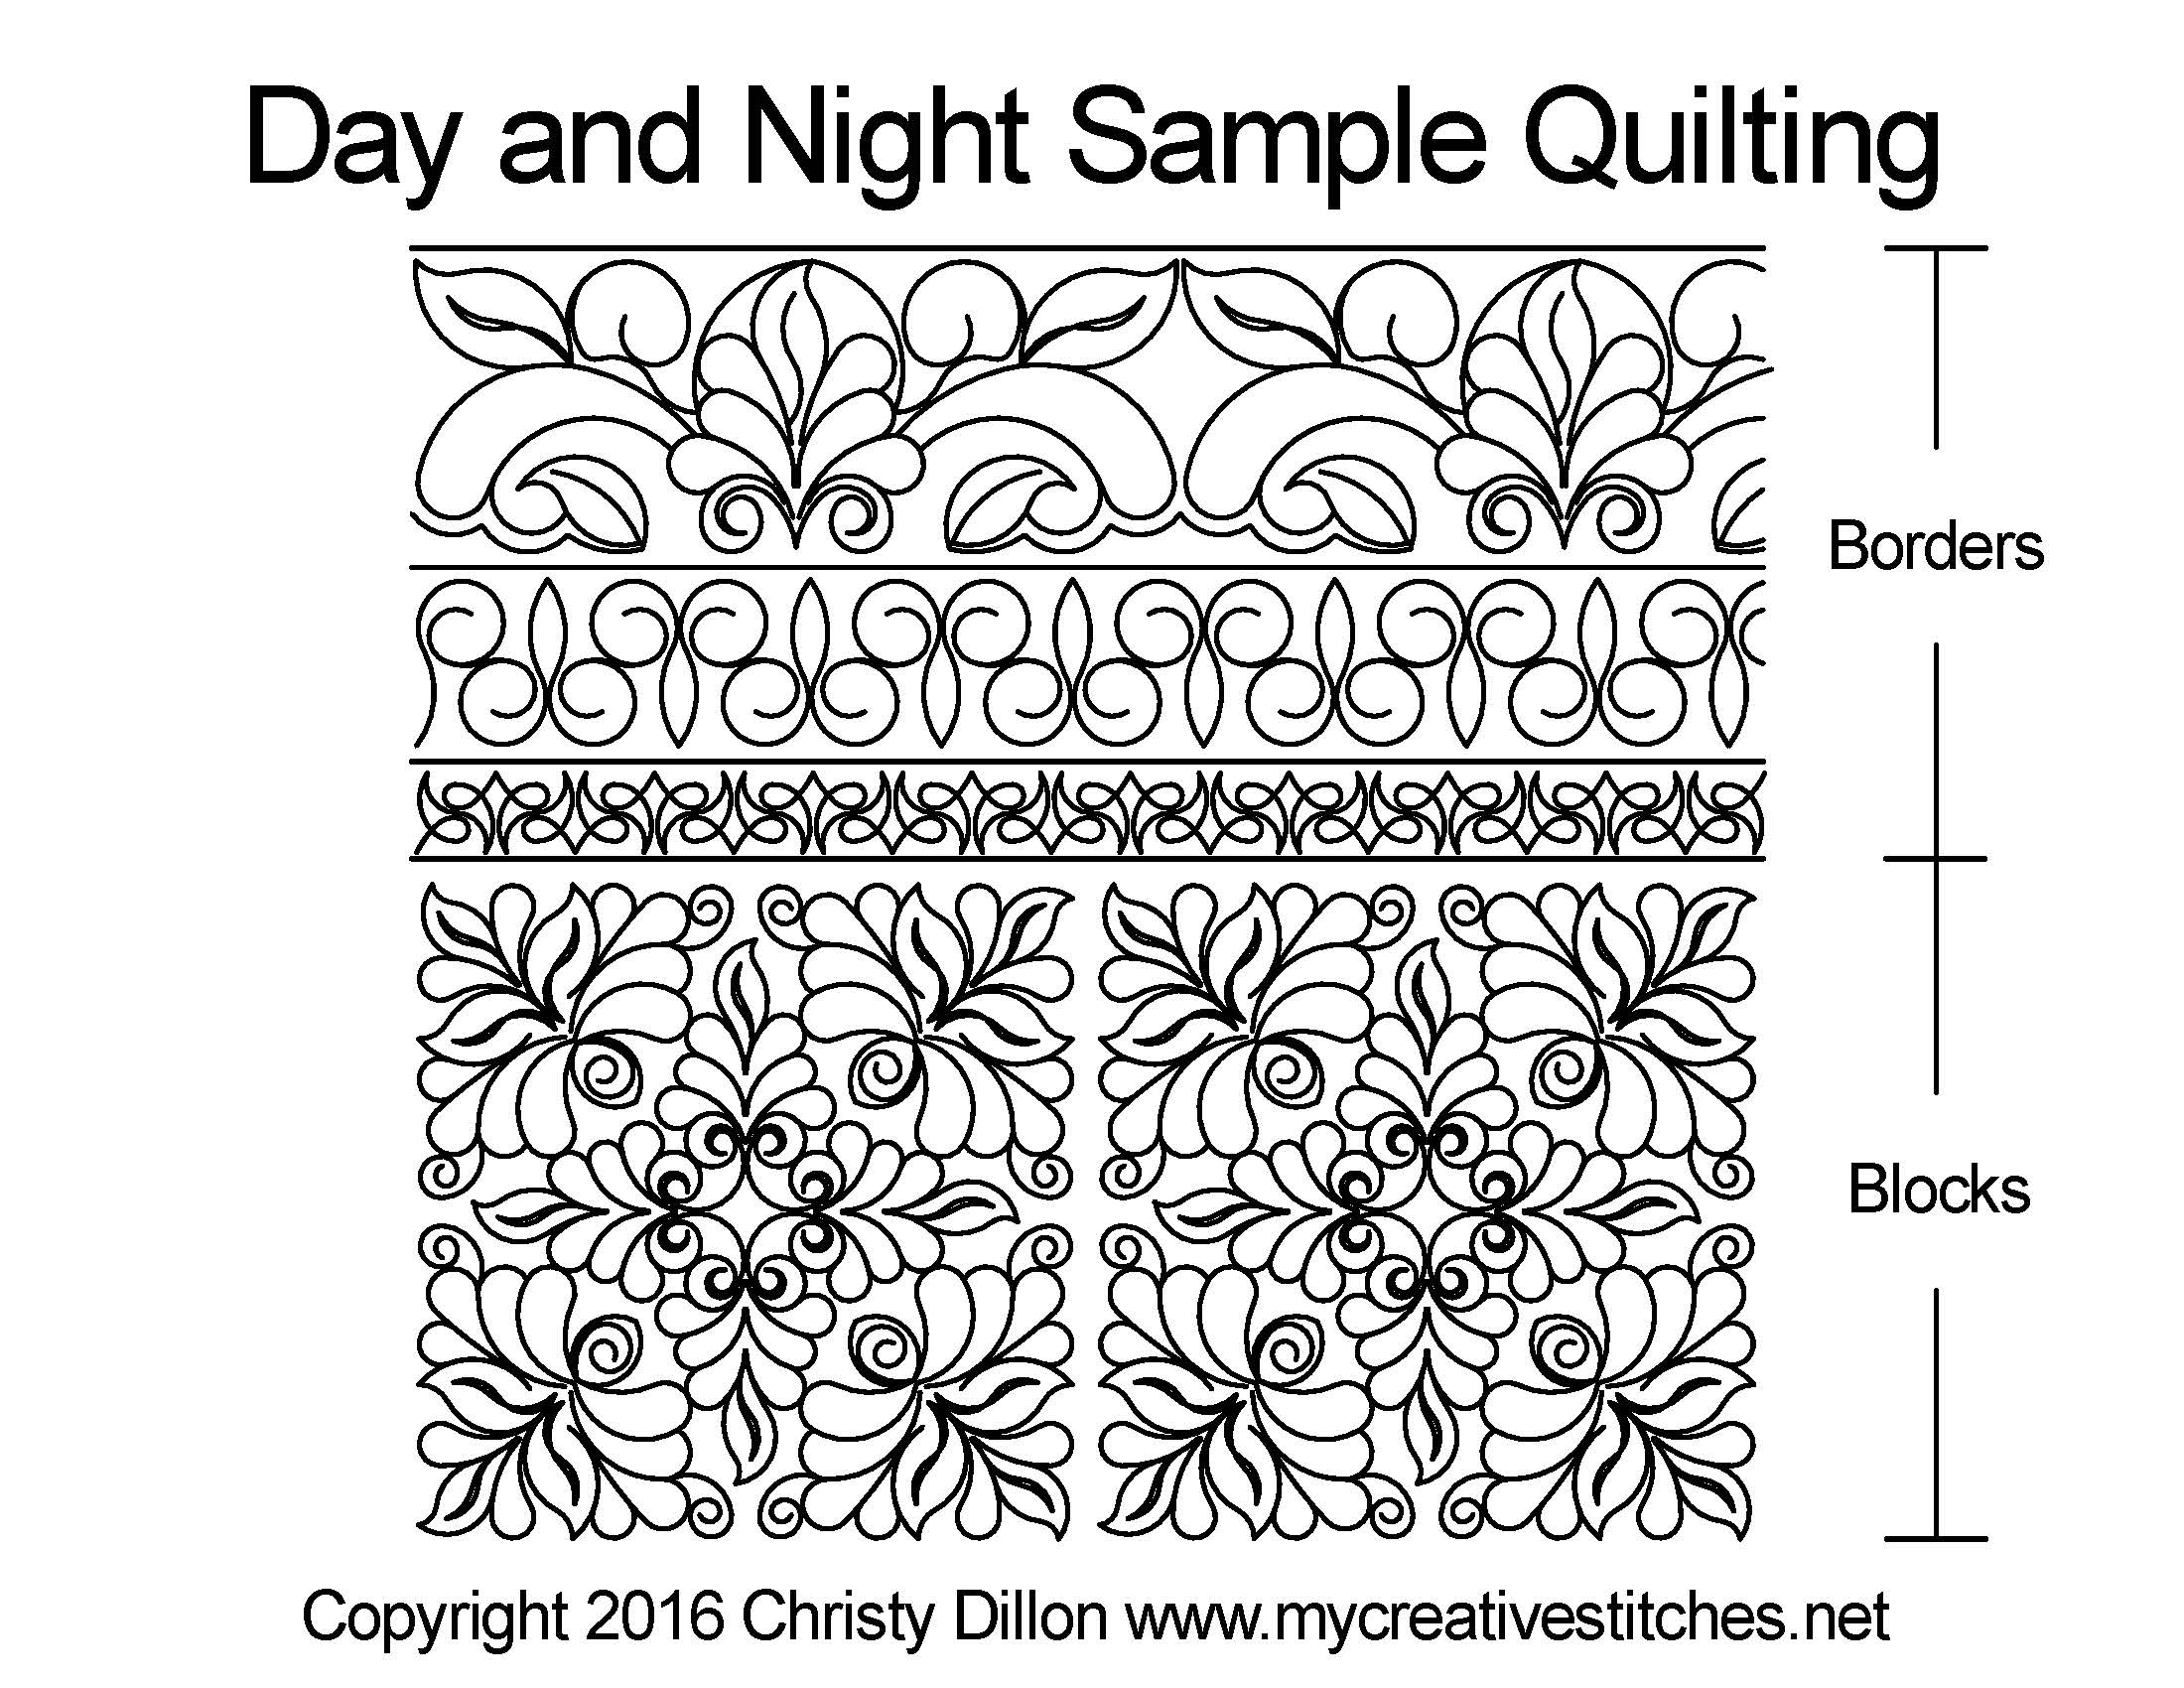 Day and Nigt Sample Quilting